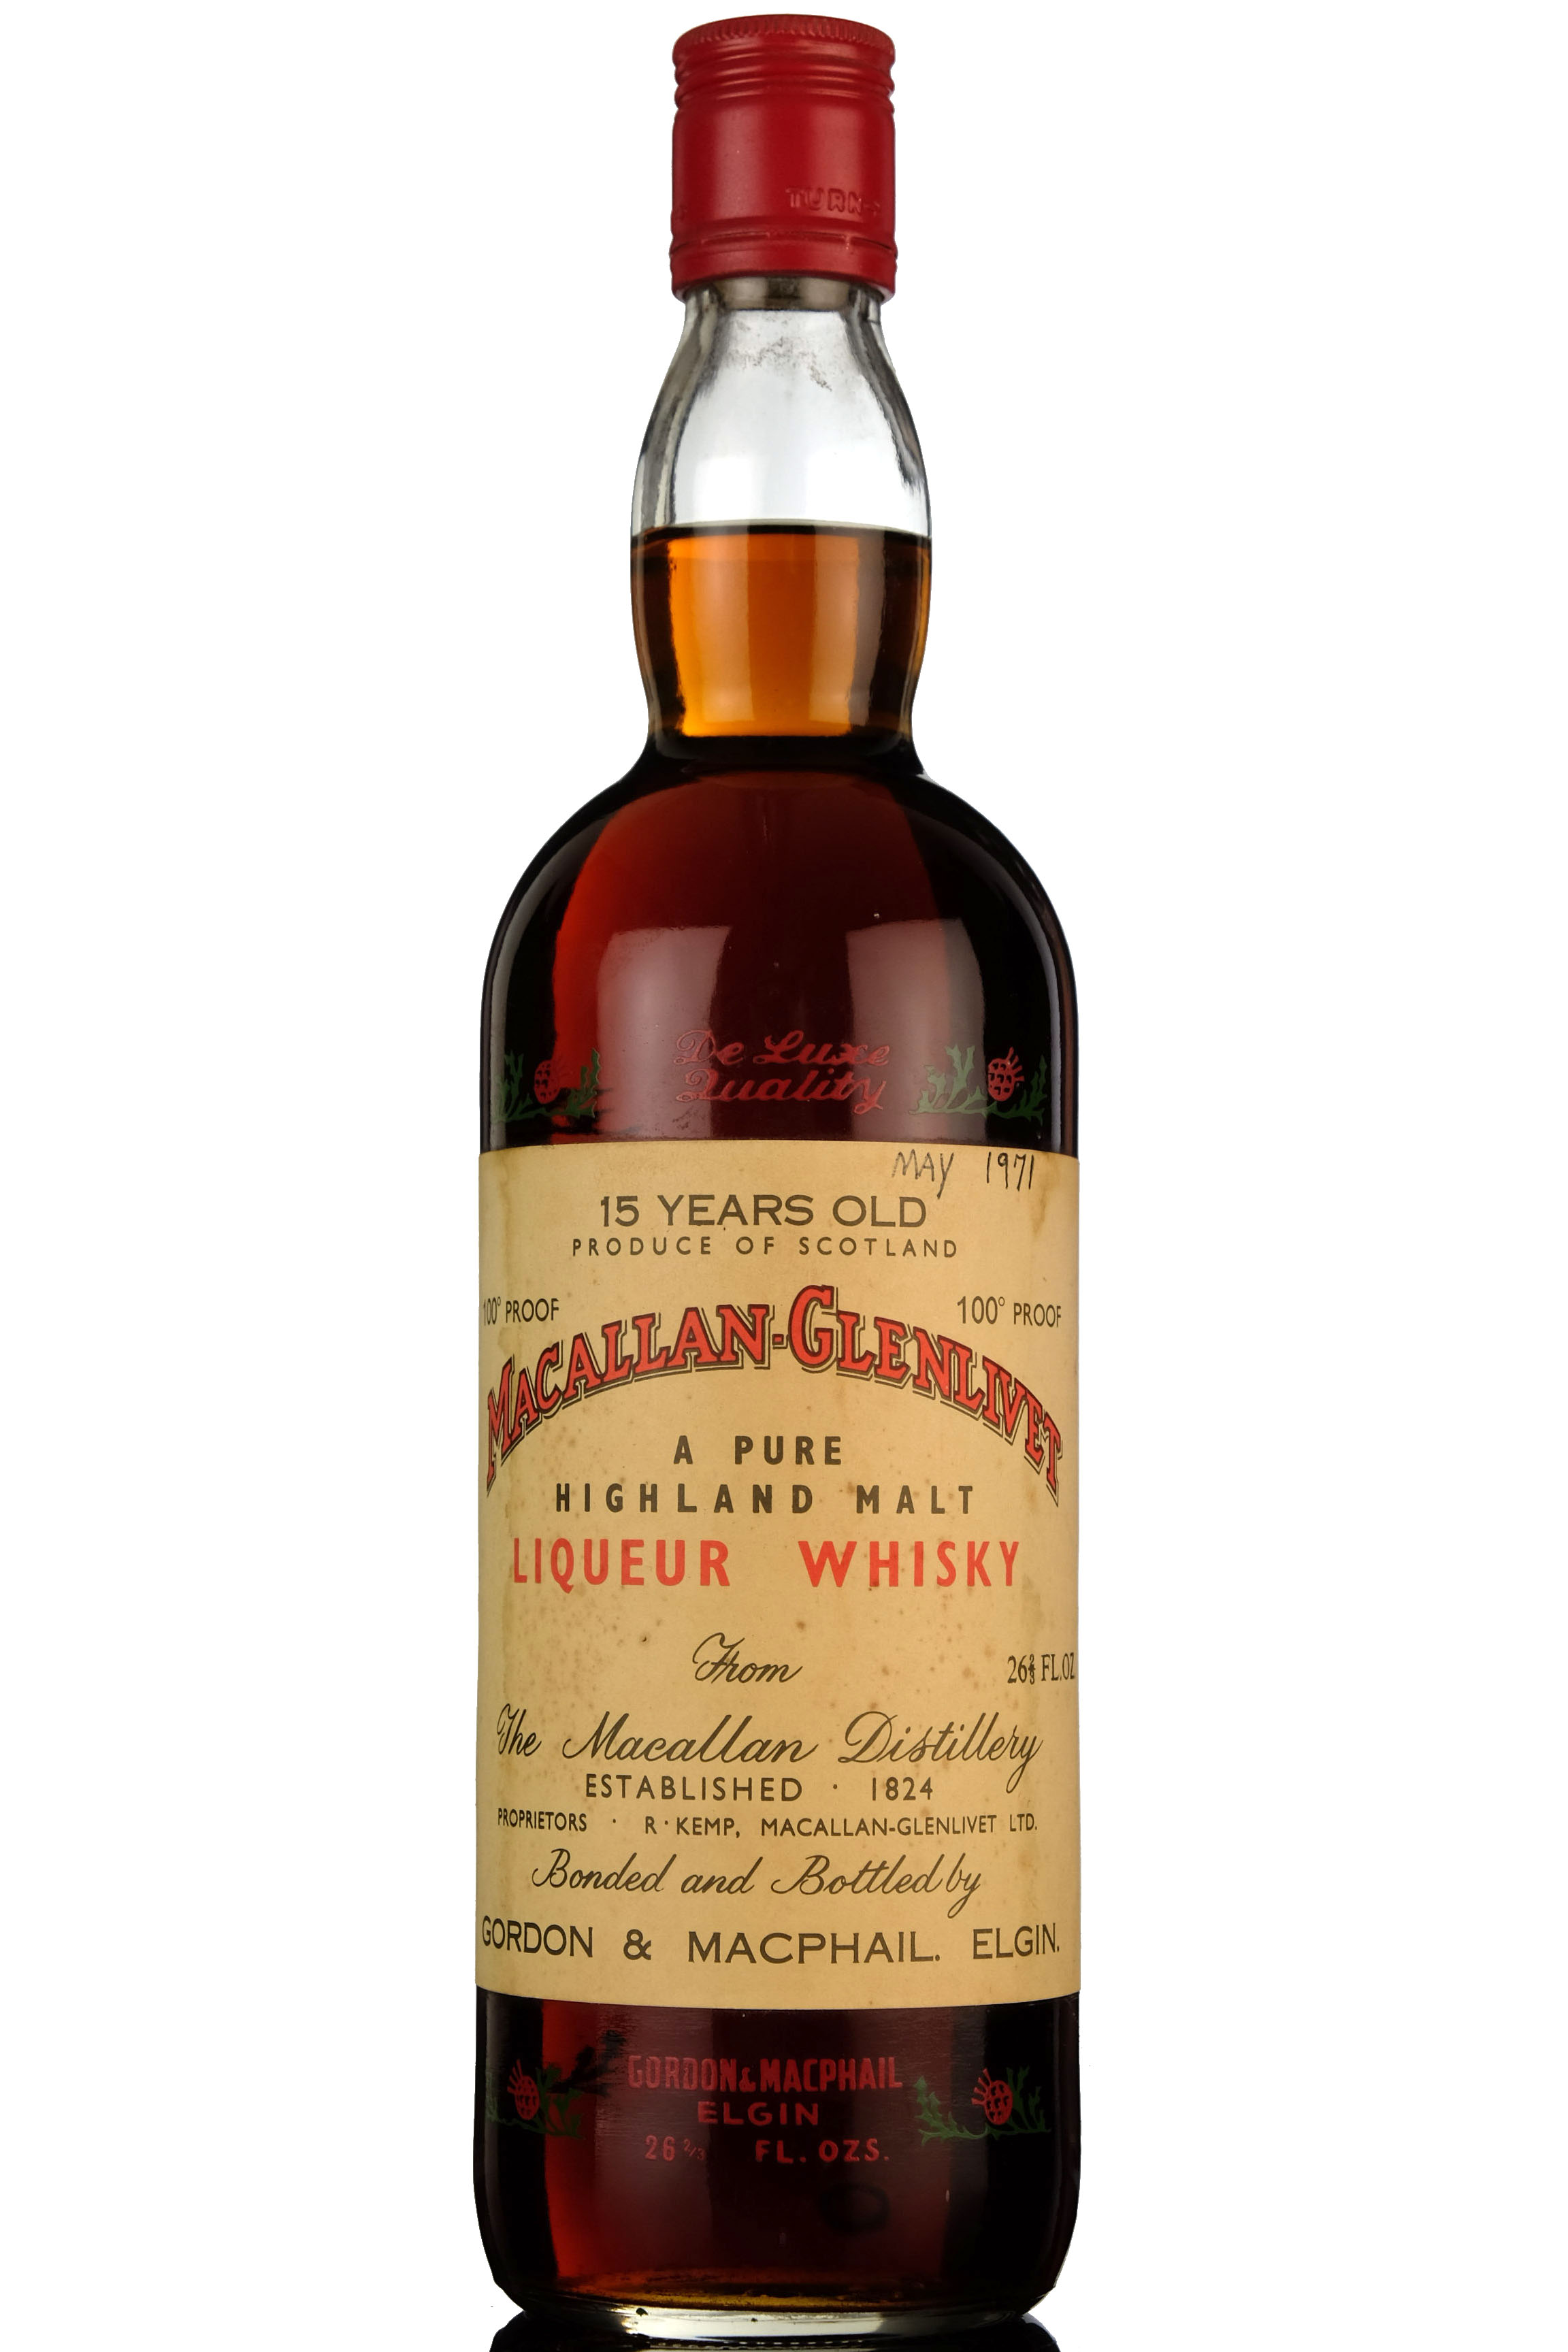 Macallan 15 Year Old - Liqueur Whisky - Gordon & MacPhail - Early 1970s - 100 Proof